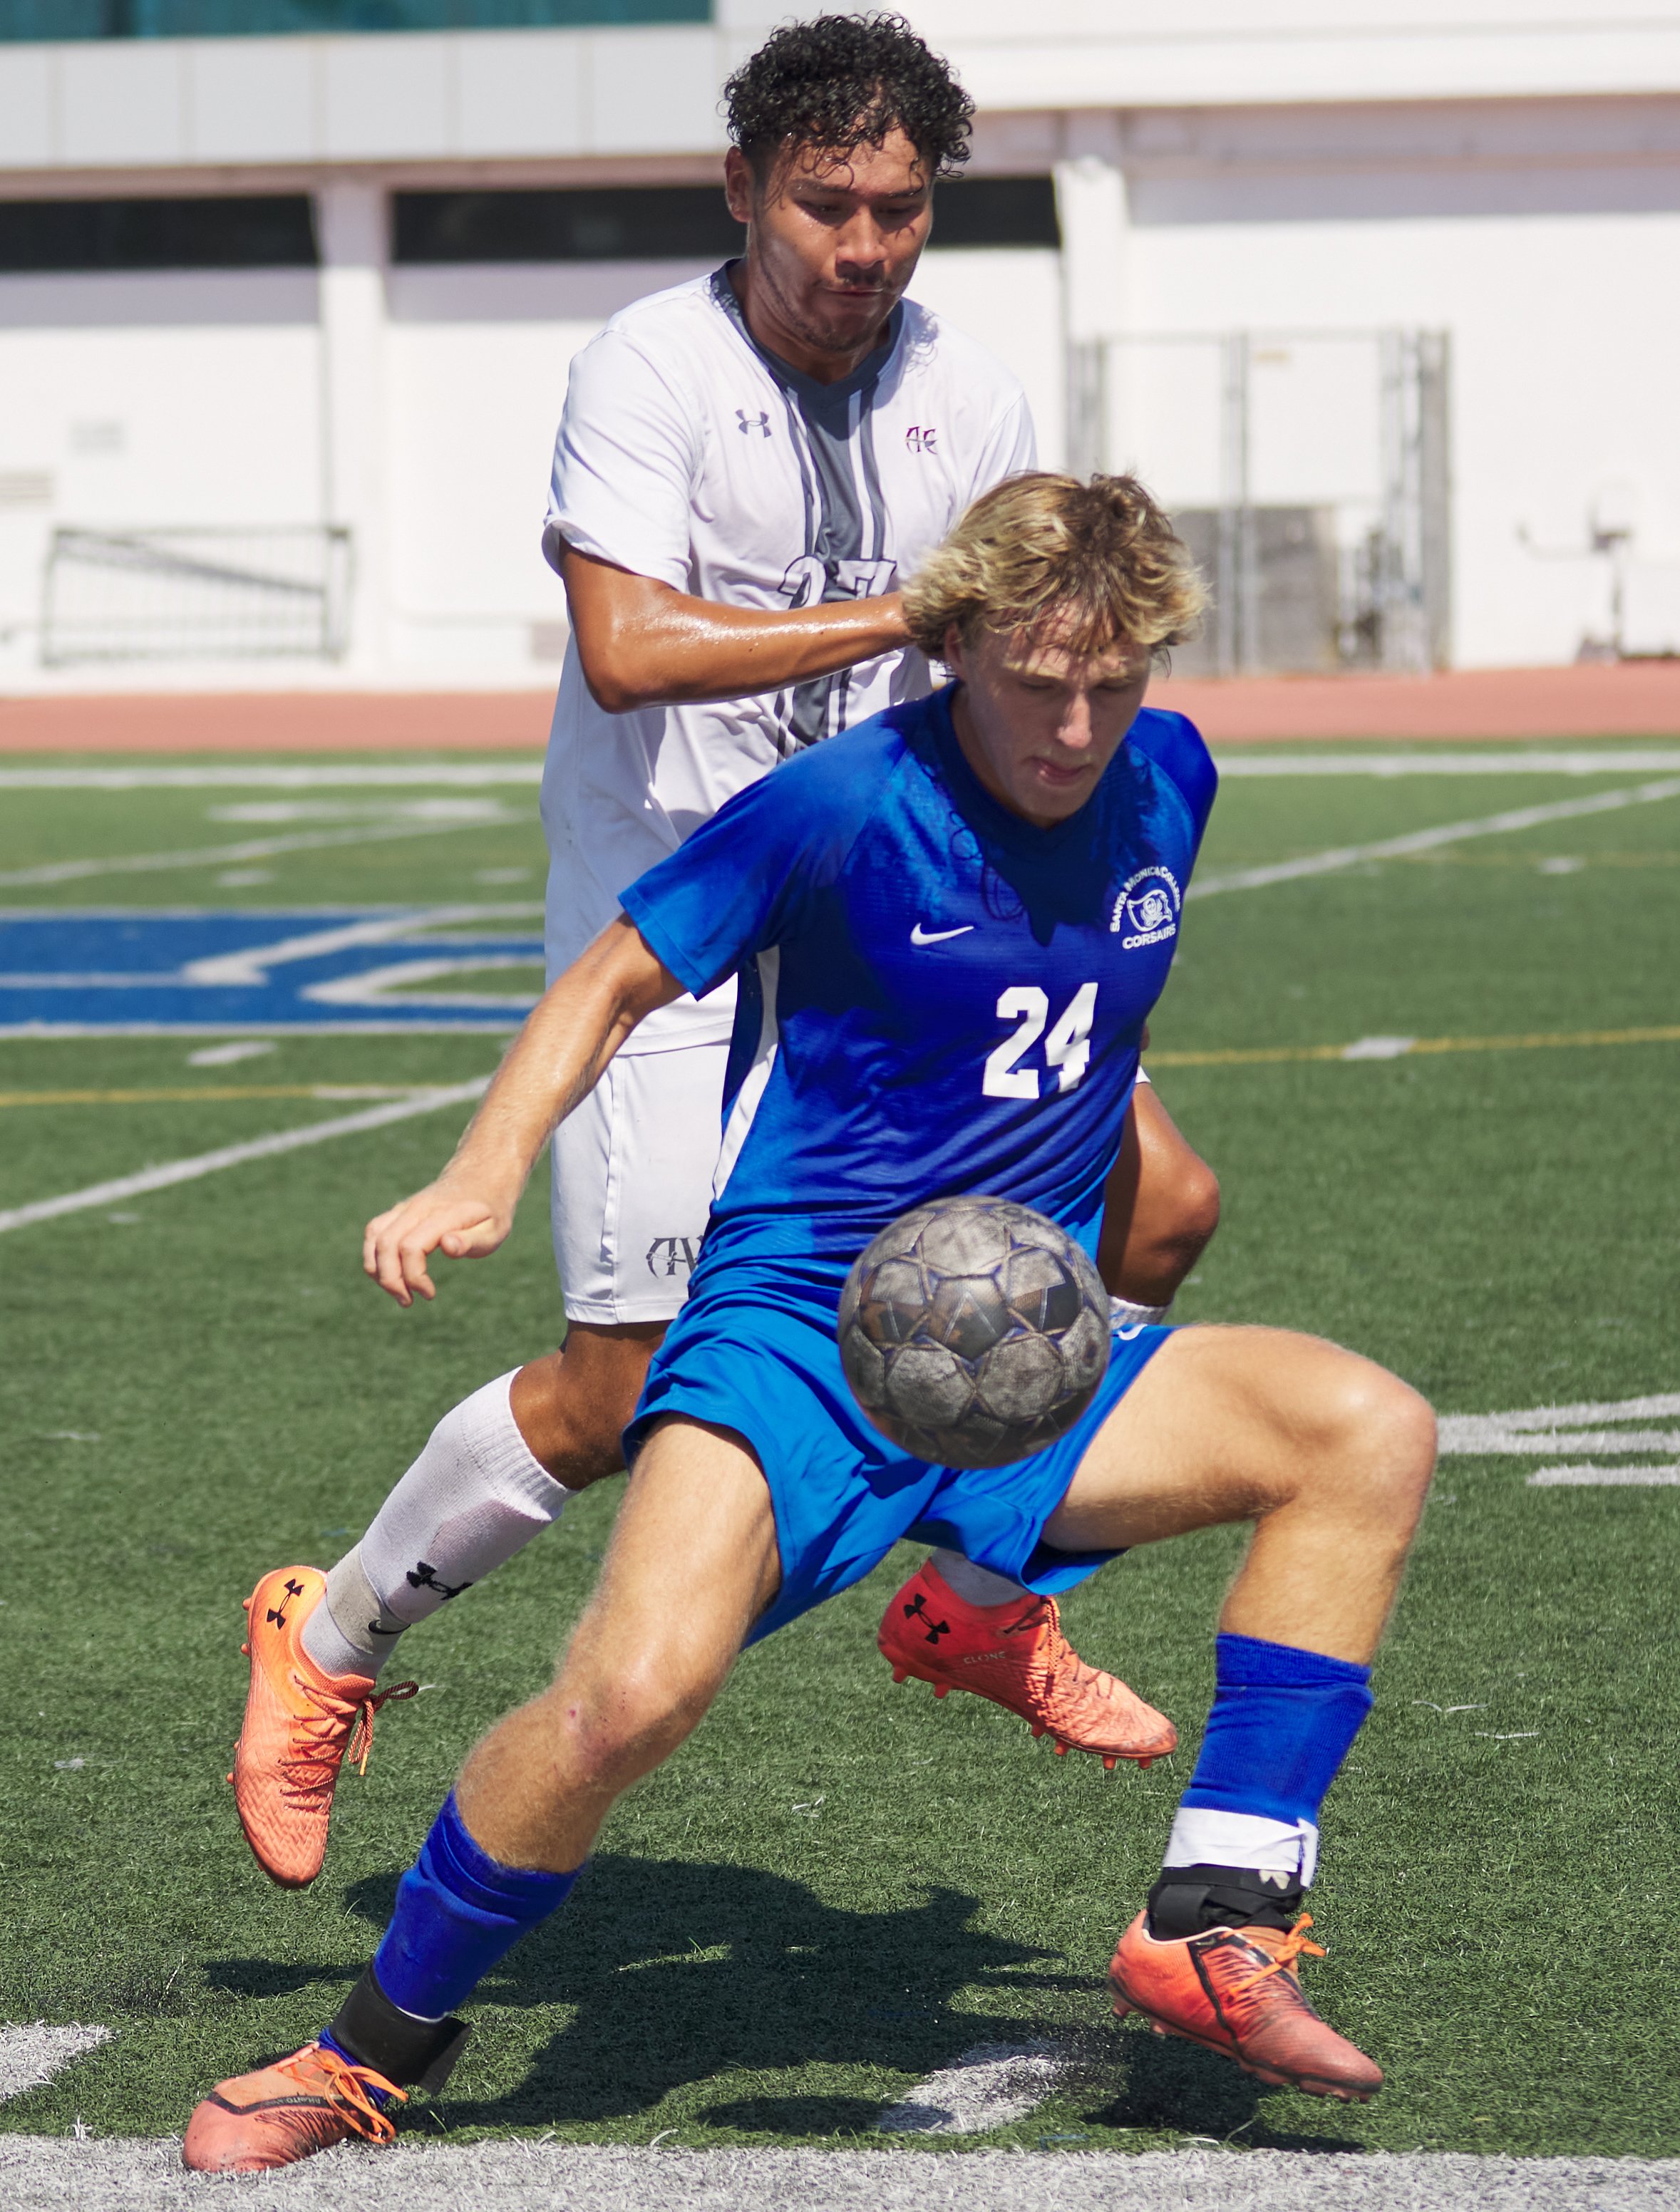  Santa Monica College Corsairs' Alexander Lalor (front) and Antelope Valley College Marauders' Sergio Garcia during the men's soccer match on Friday, Sept. 30, 2022, at Corsair Field in Santa Monica, Calif. The Corsairs tied 1-1. (Nicholas McCall | T